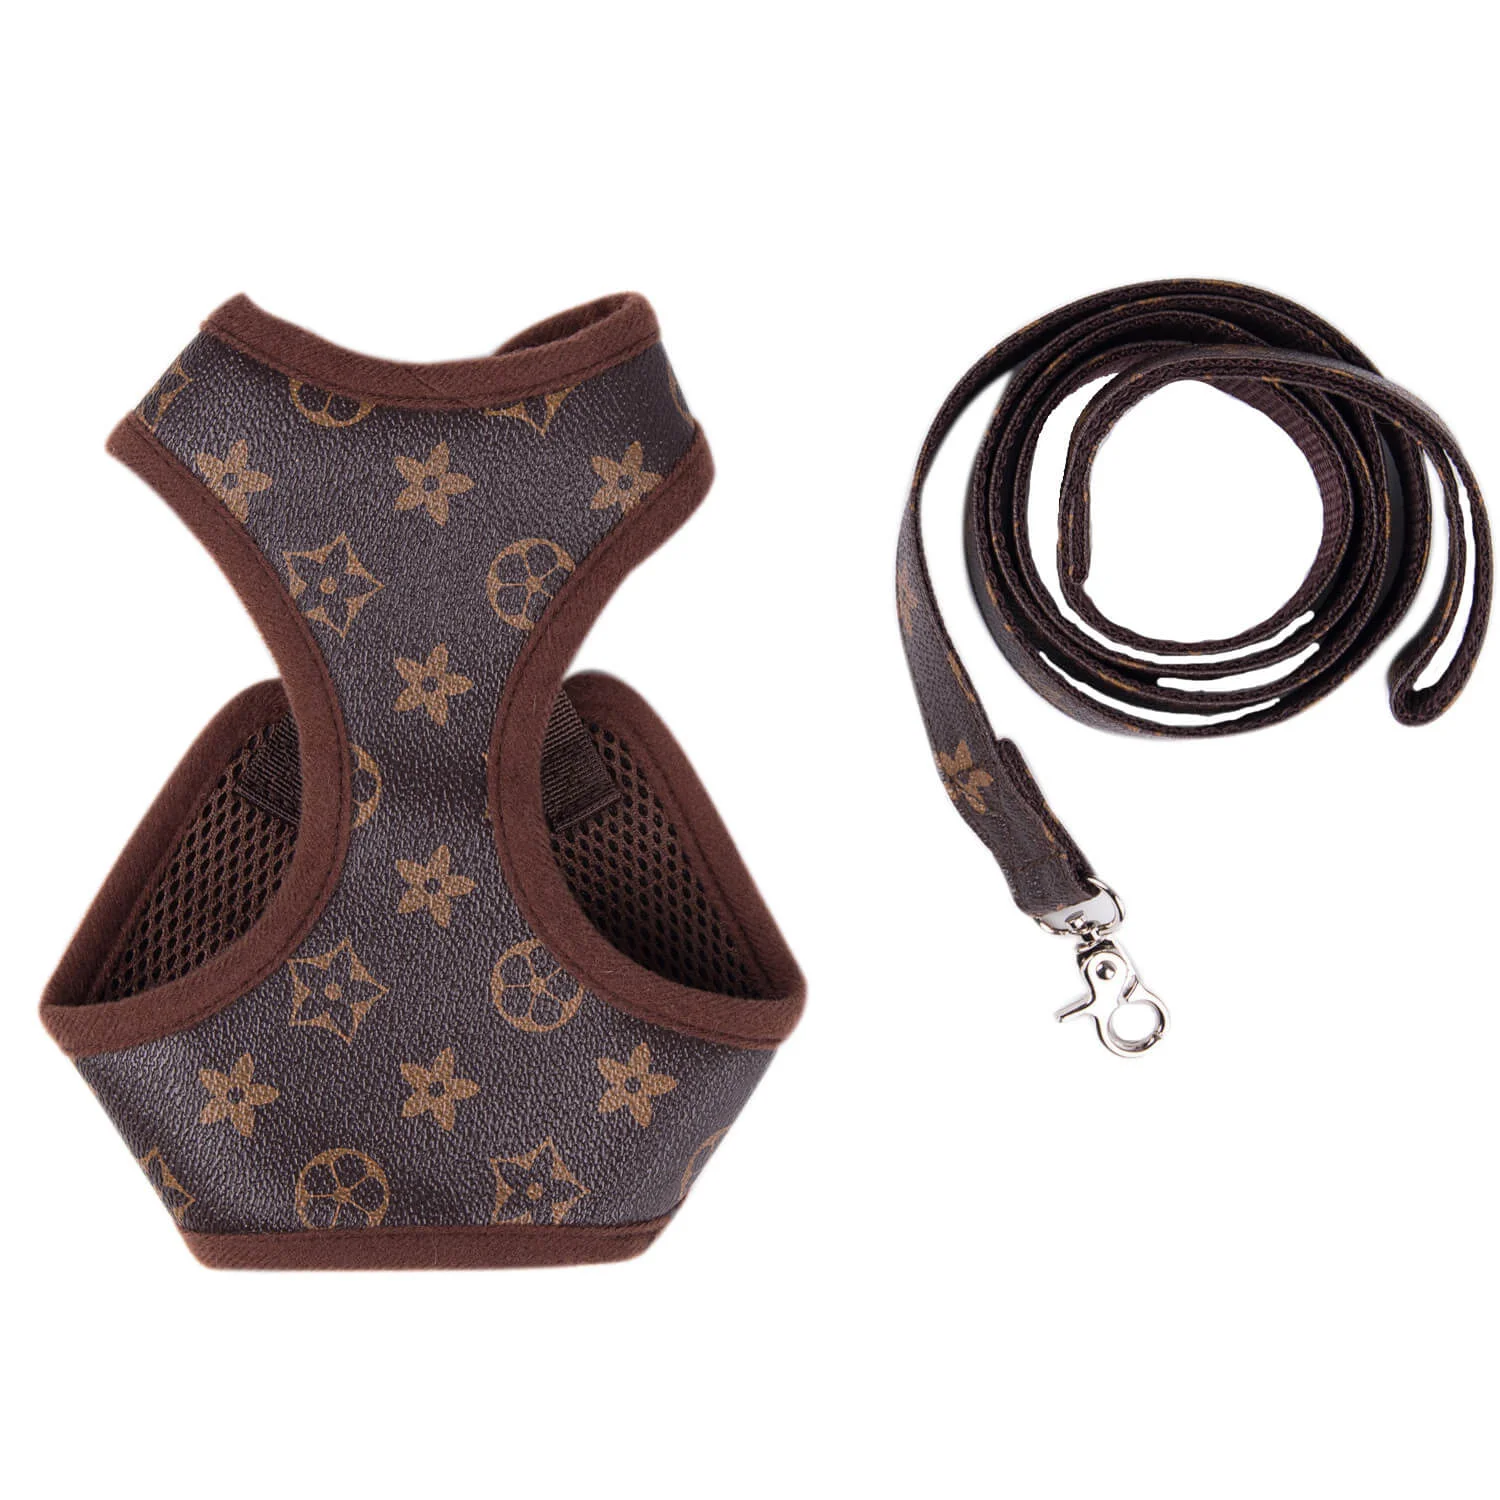 frenchies community shop frenchiescommunity louie brown edition harness leash